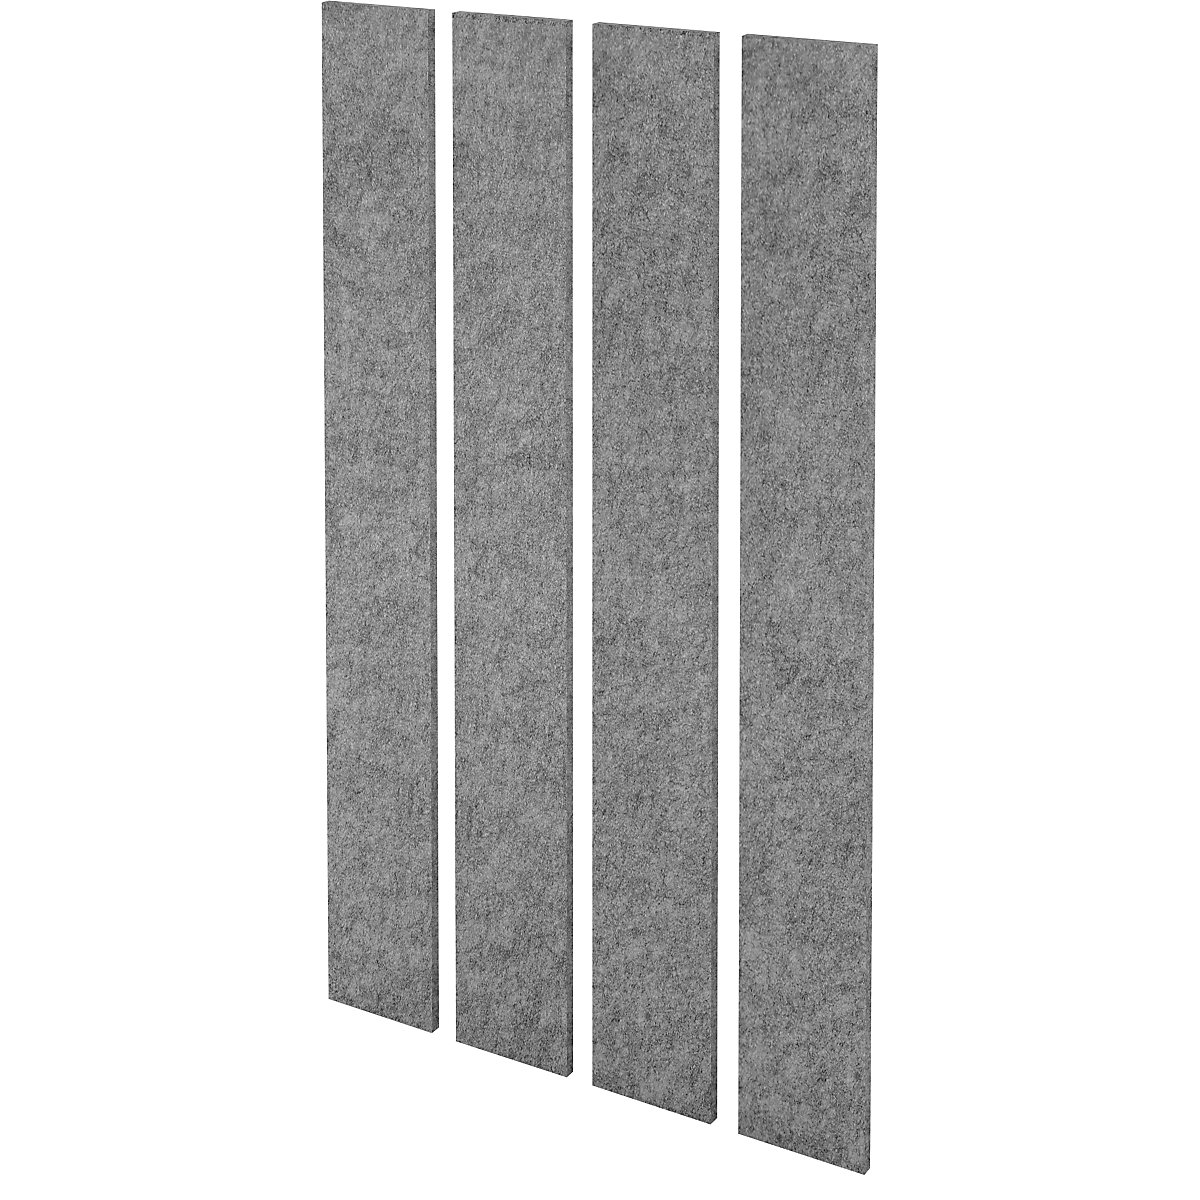 Acoustic wall panel set, wall thickness 25 mm, grey mottled, pack of 4, HxW 2000 x 250 mm-4